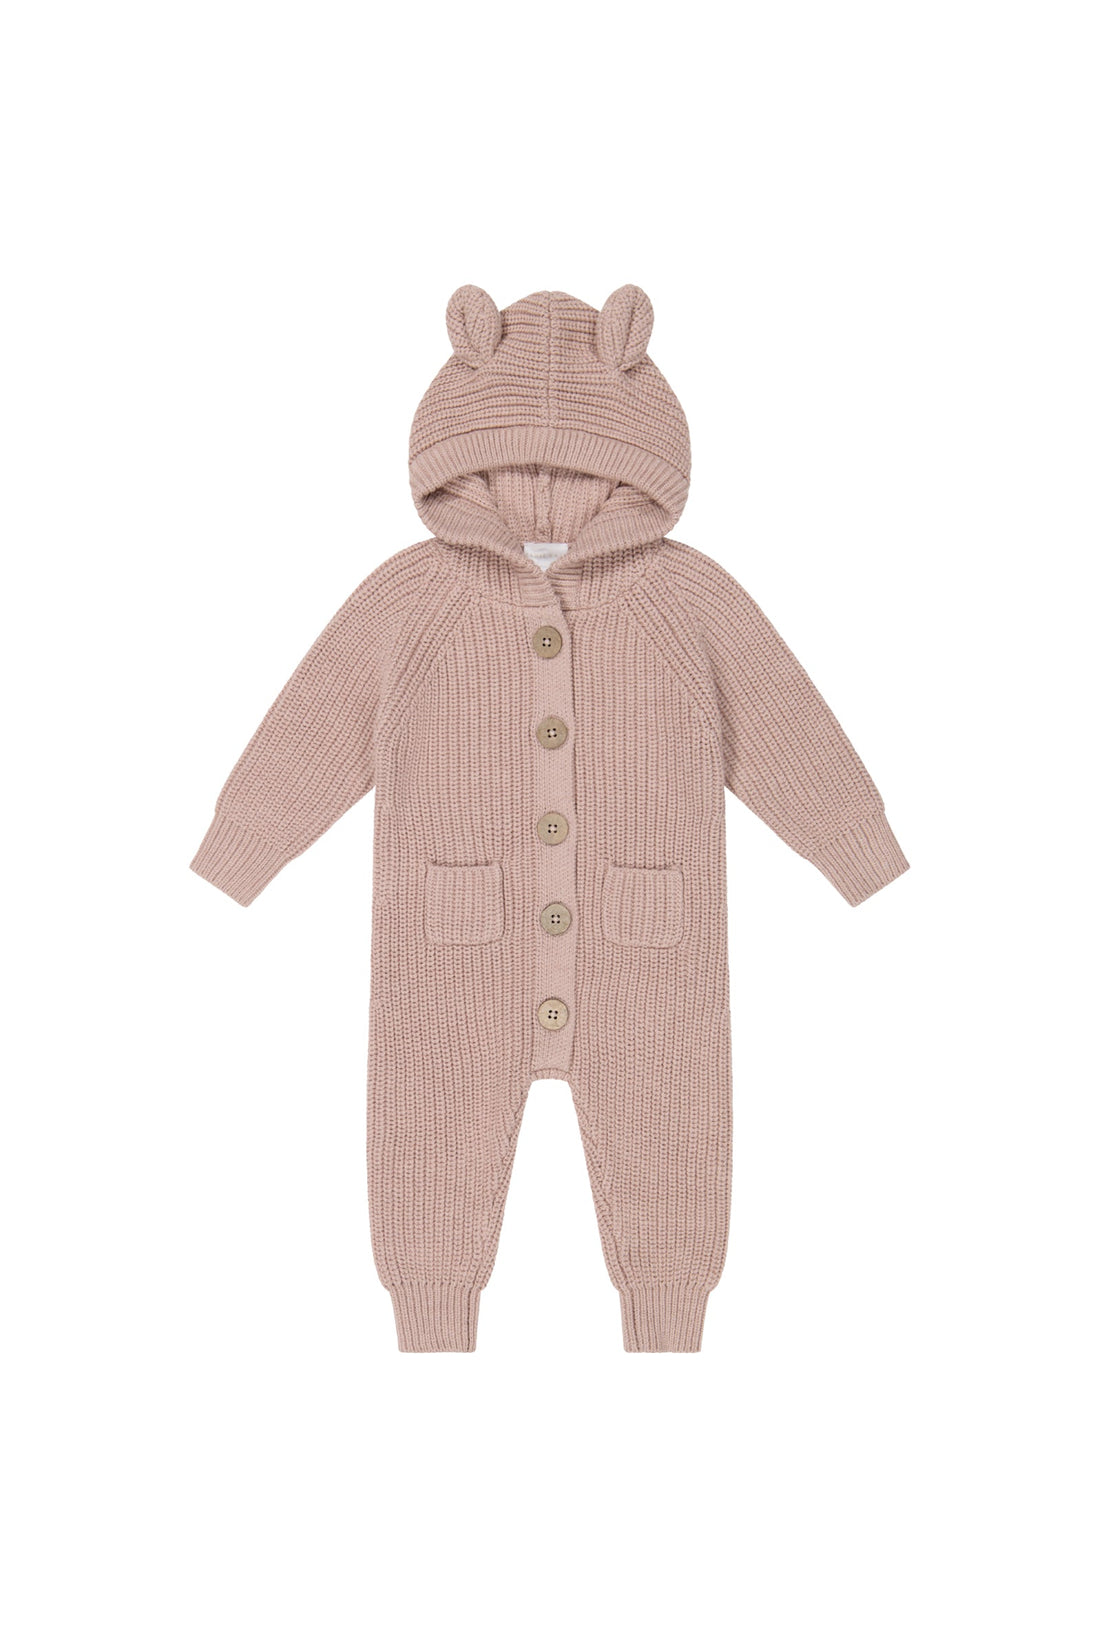 Kay Mahogany Marle Jamie – Knitted Rose USA Luca - Onepiece